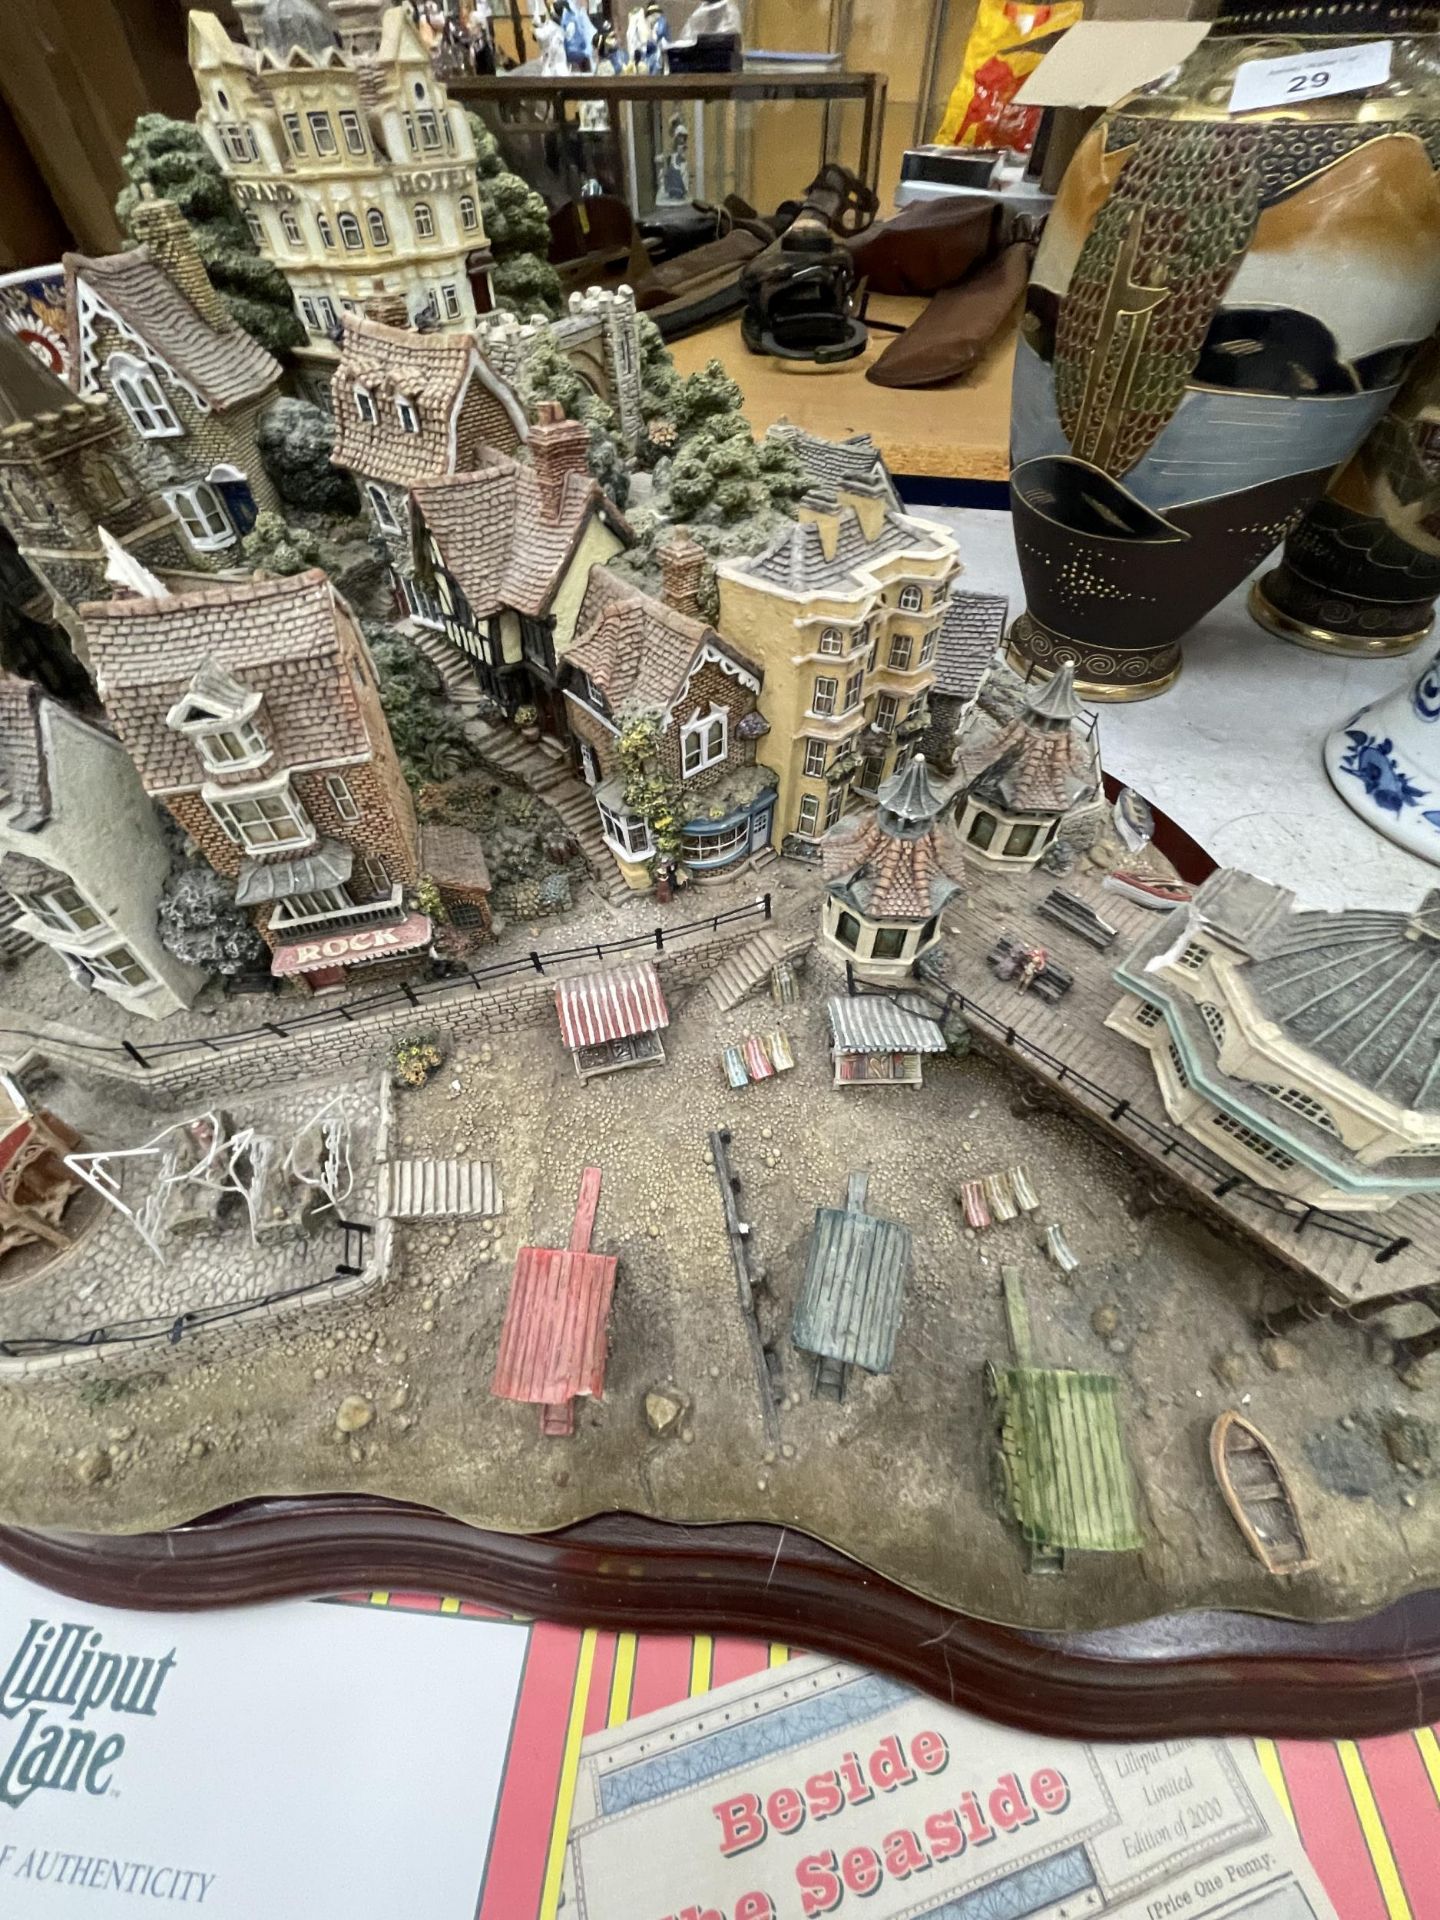 A LARGE LILLIPUT LANE 'BESIDE THE SEASIDE' TABLEAU WITH CERTIFICATE AND BOX - Image 3 of 5